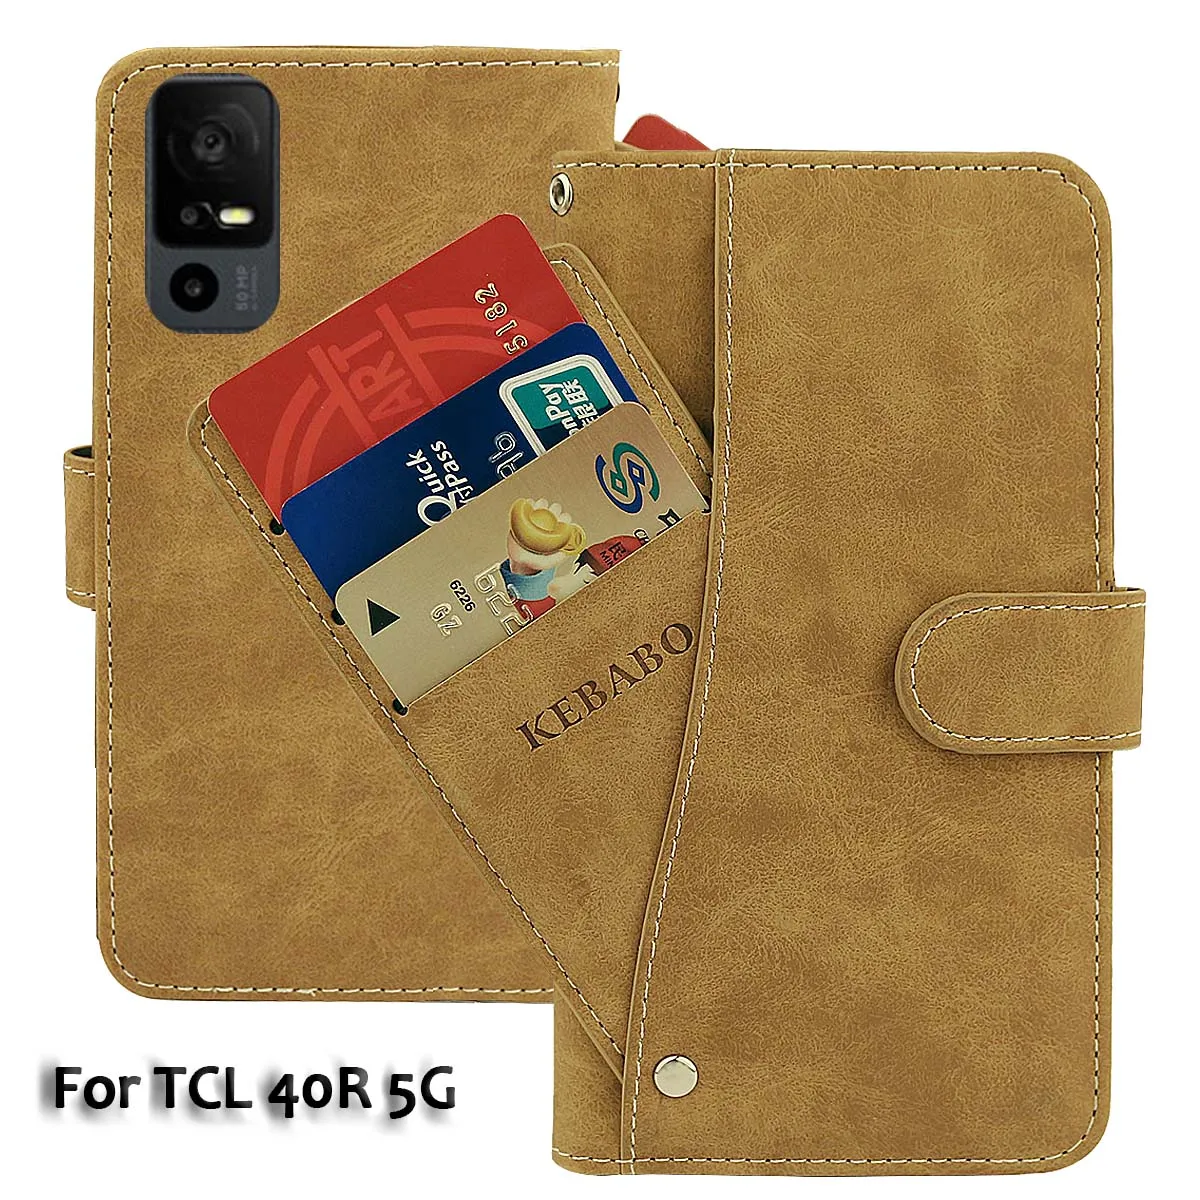 

Vintage Leather Wallet TCL 40R 5G Case 6.6" Flip Luxury Card Slots Cover Magnet Phone Protective Cases Bags